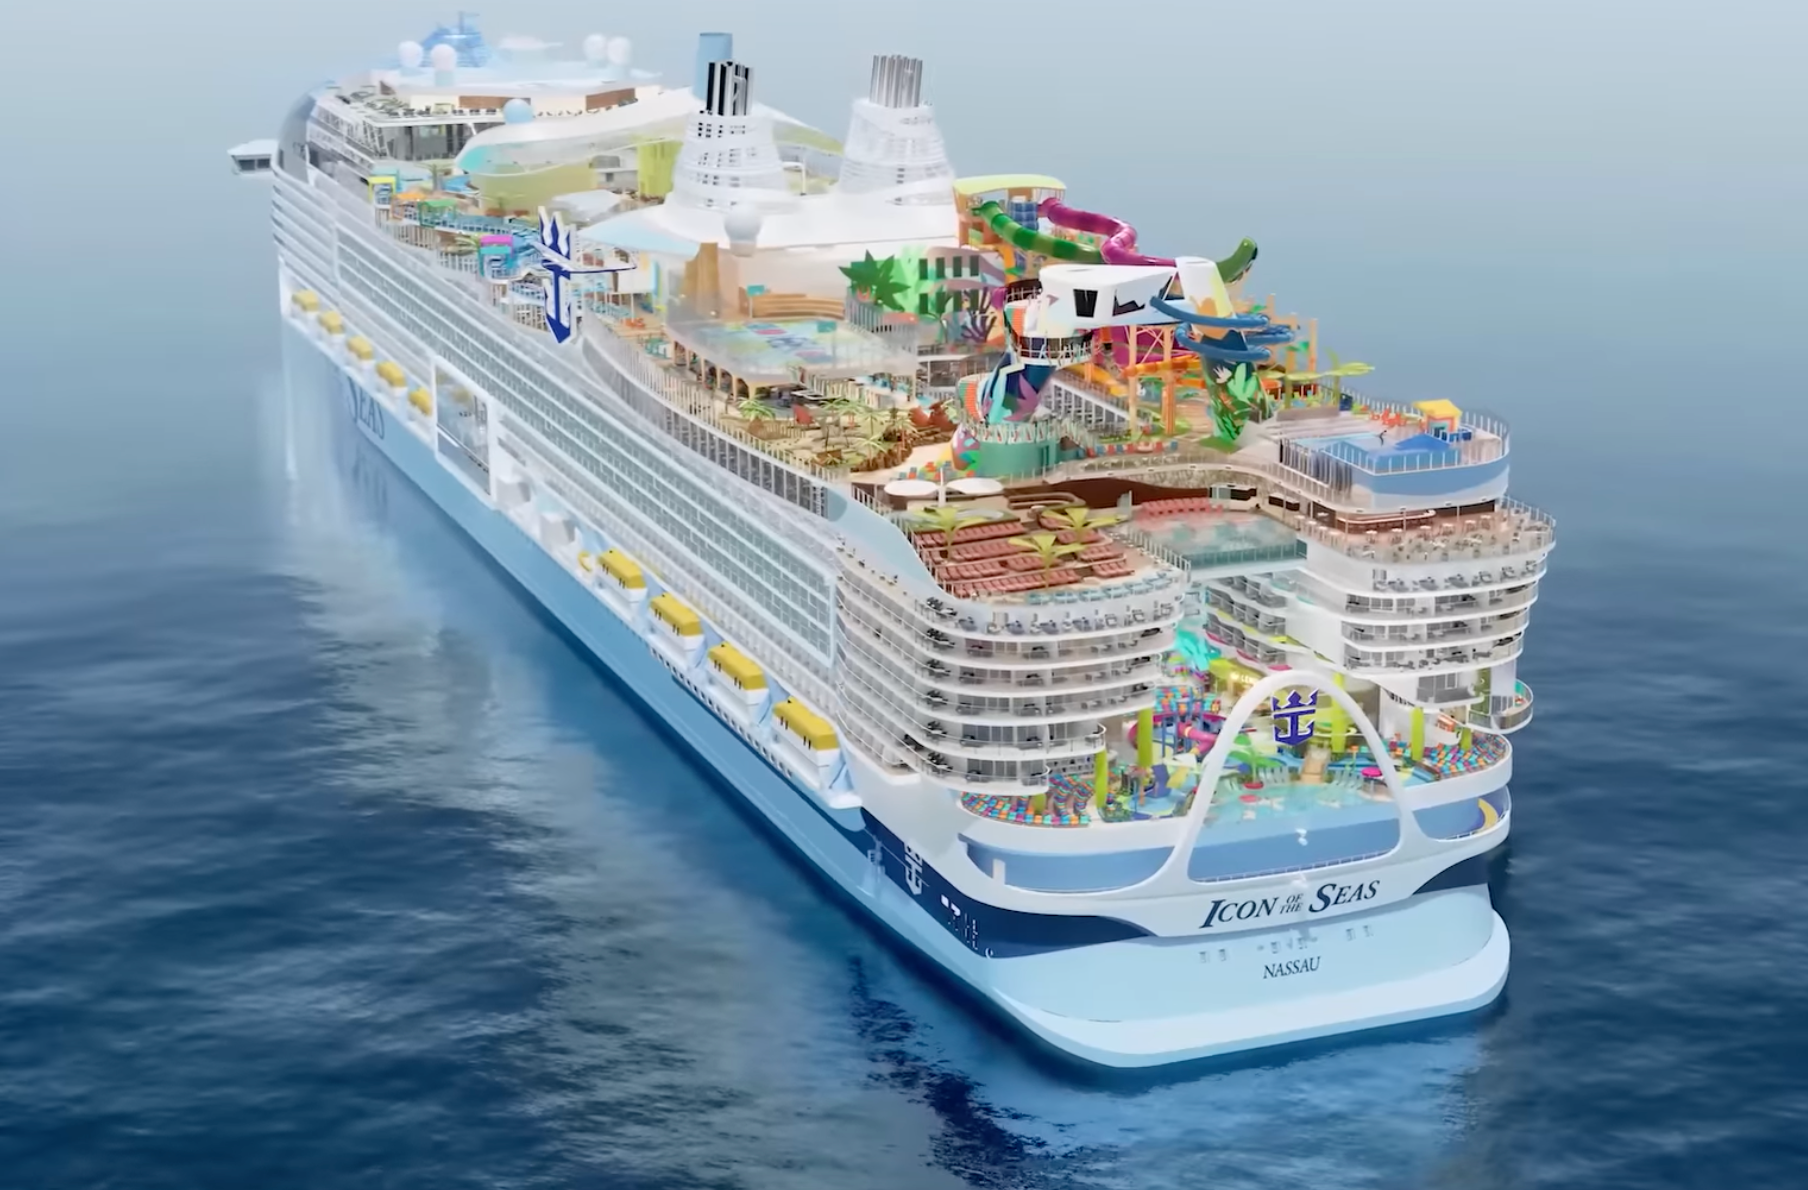 The ‘Icon of the Seas’ will be the world’s largest cruise ship